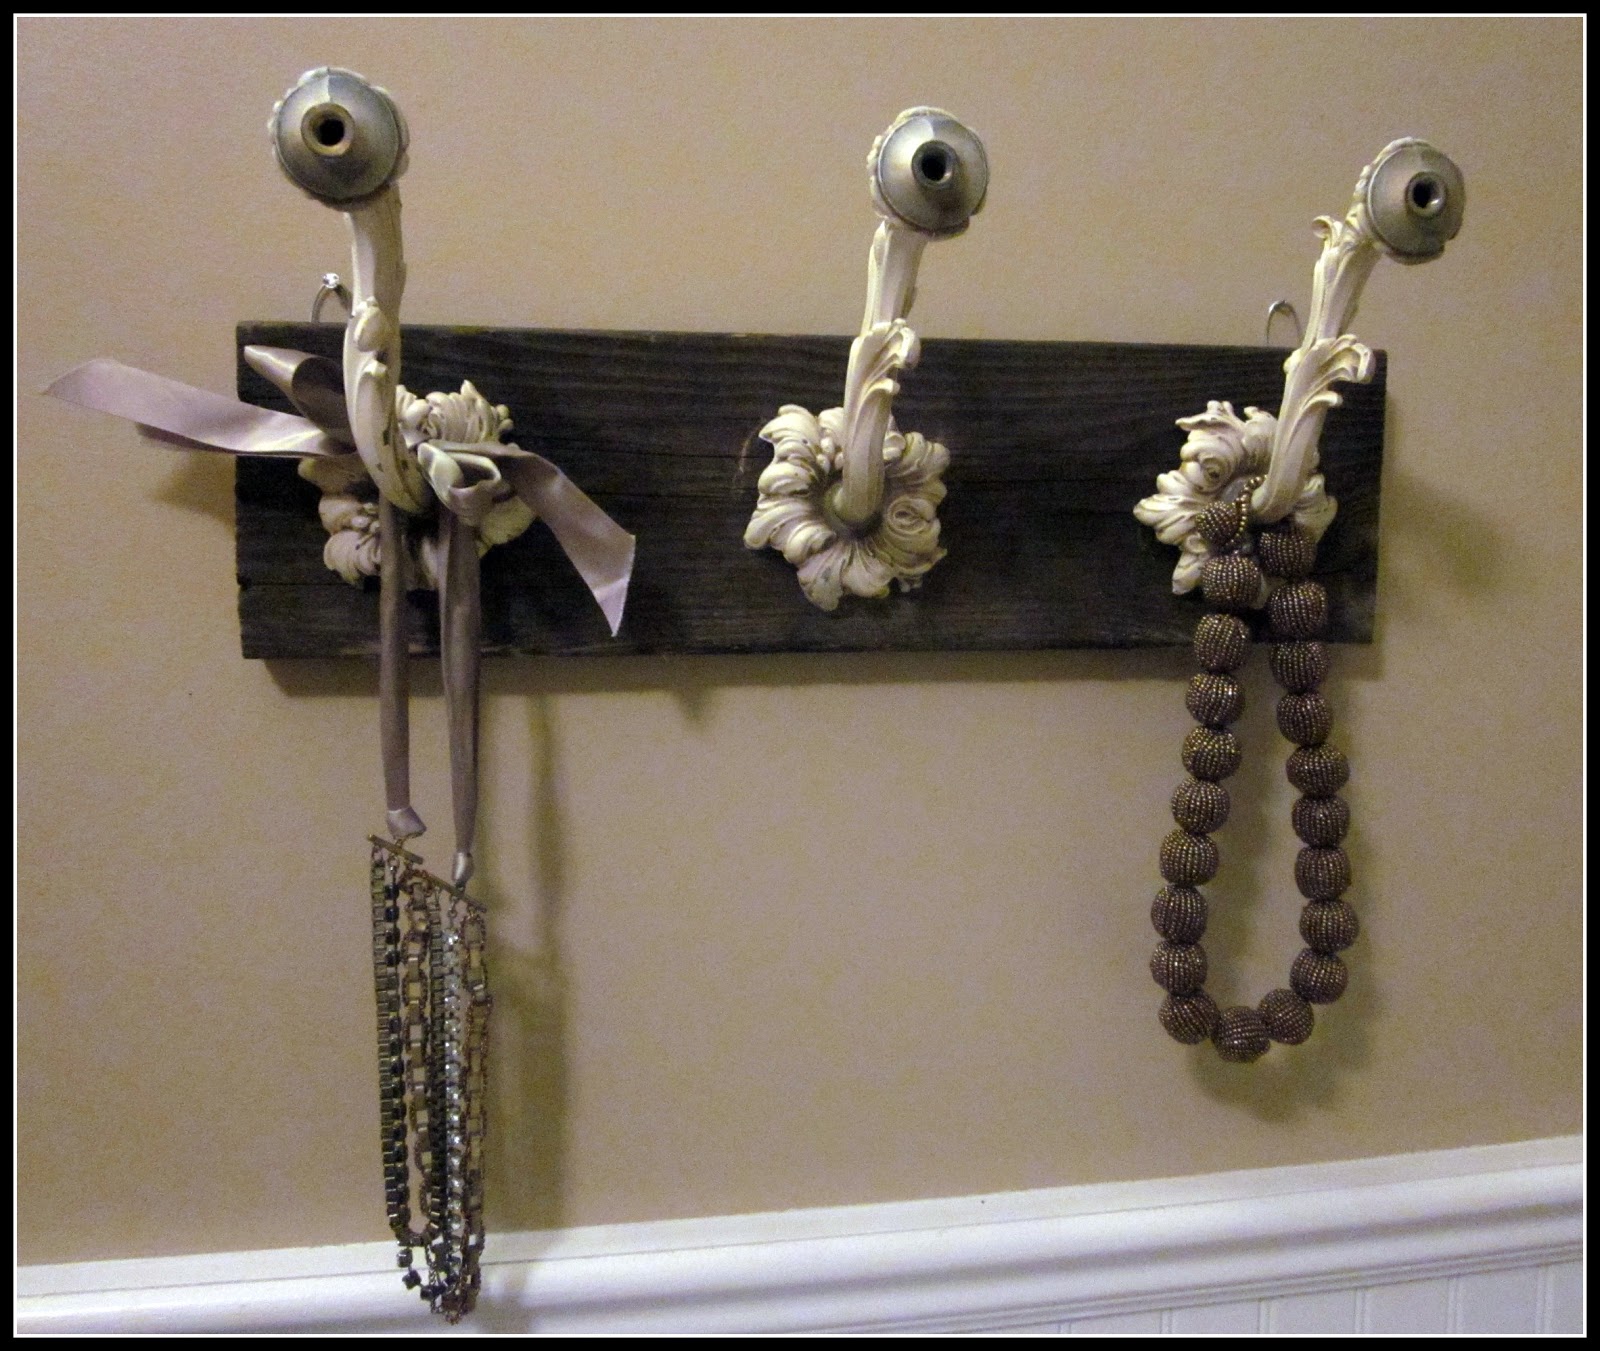 Update a Lamp to Jewelry Hooks